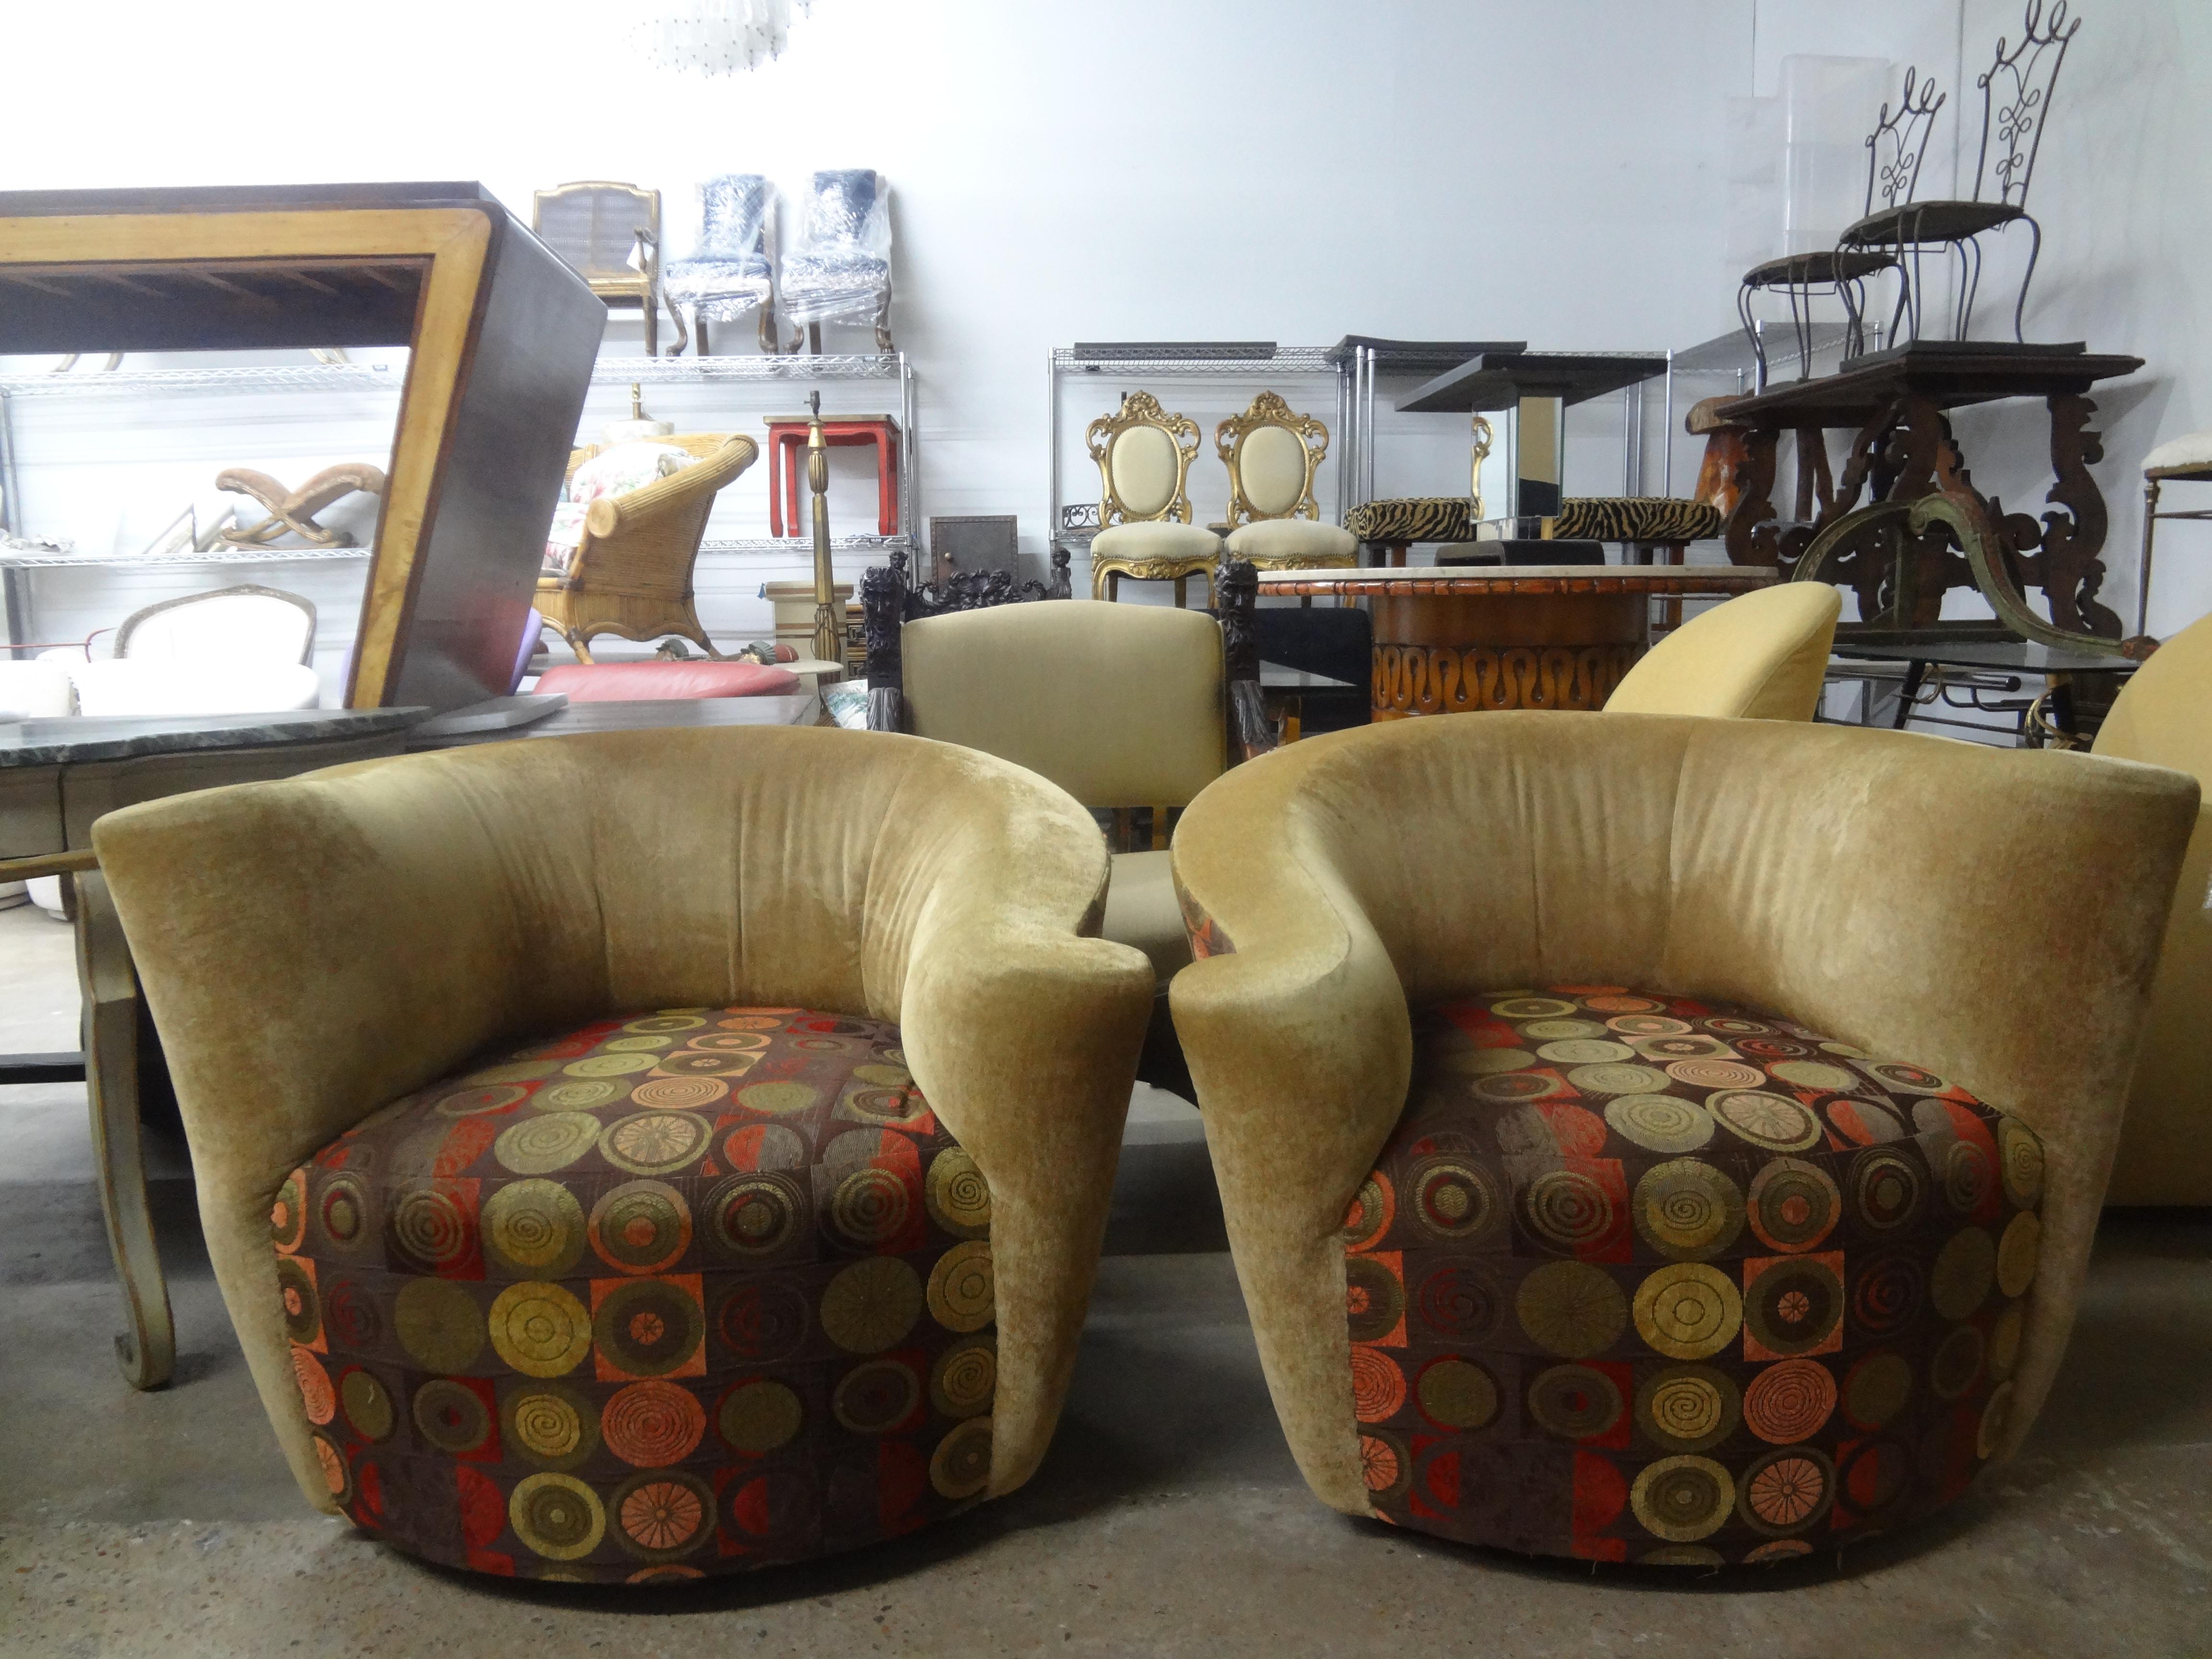 Pair Of Vladimir Kagan Swivel Chairs.
This handsome pair of Kagan swivel lounge chairs, club chairs or side chairs are a rare pair and extremely comfortable. Unfortunately the label is long gone as these have been newly upholstered twice since